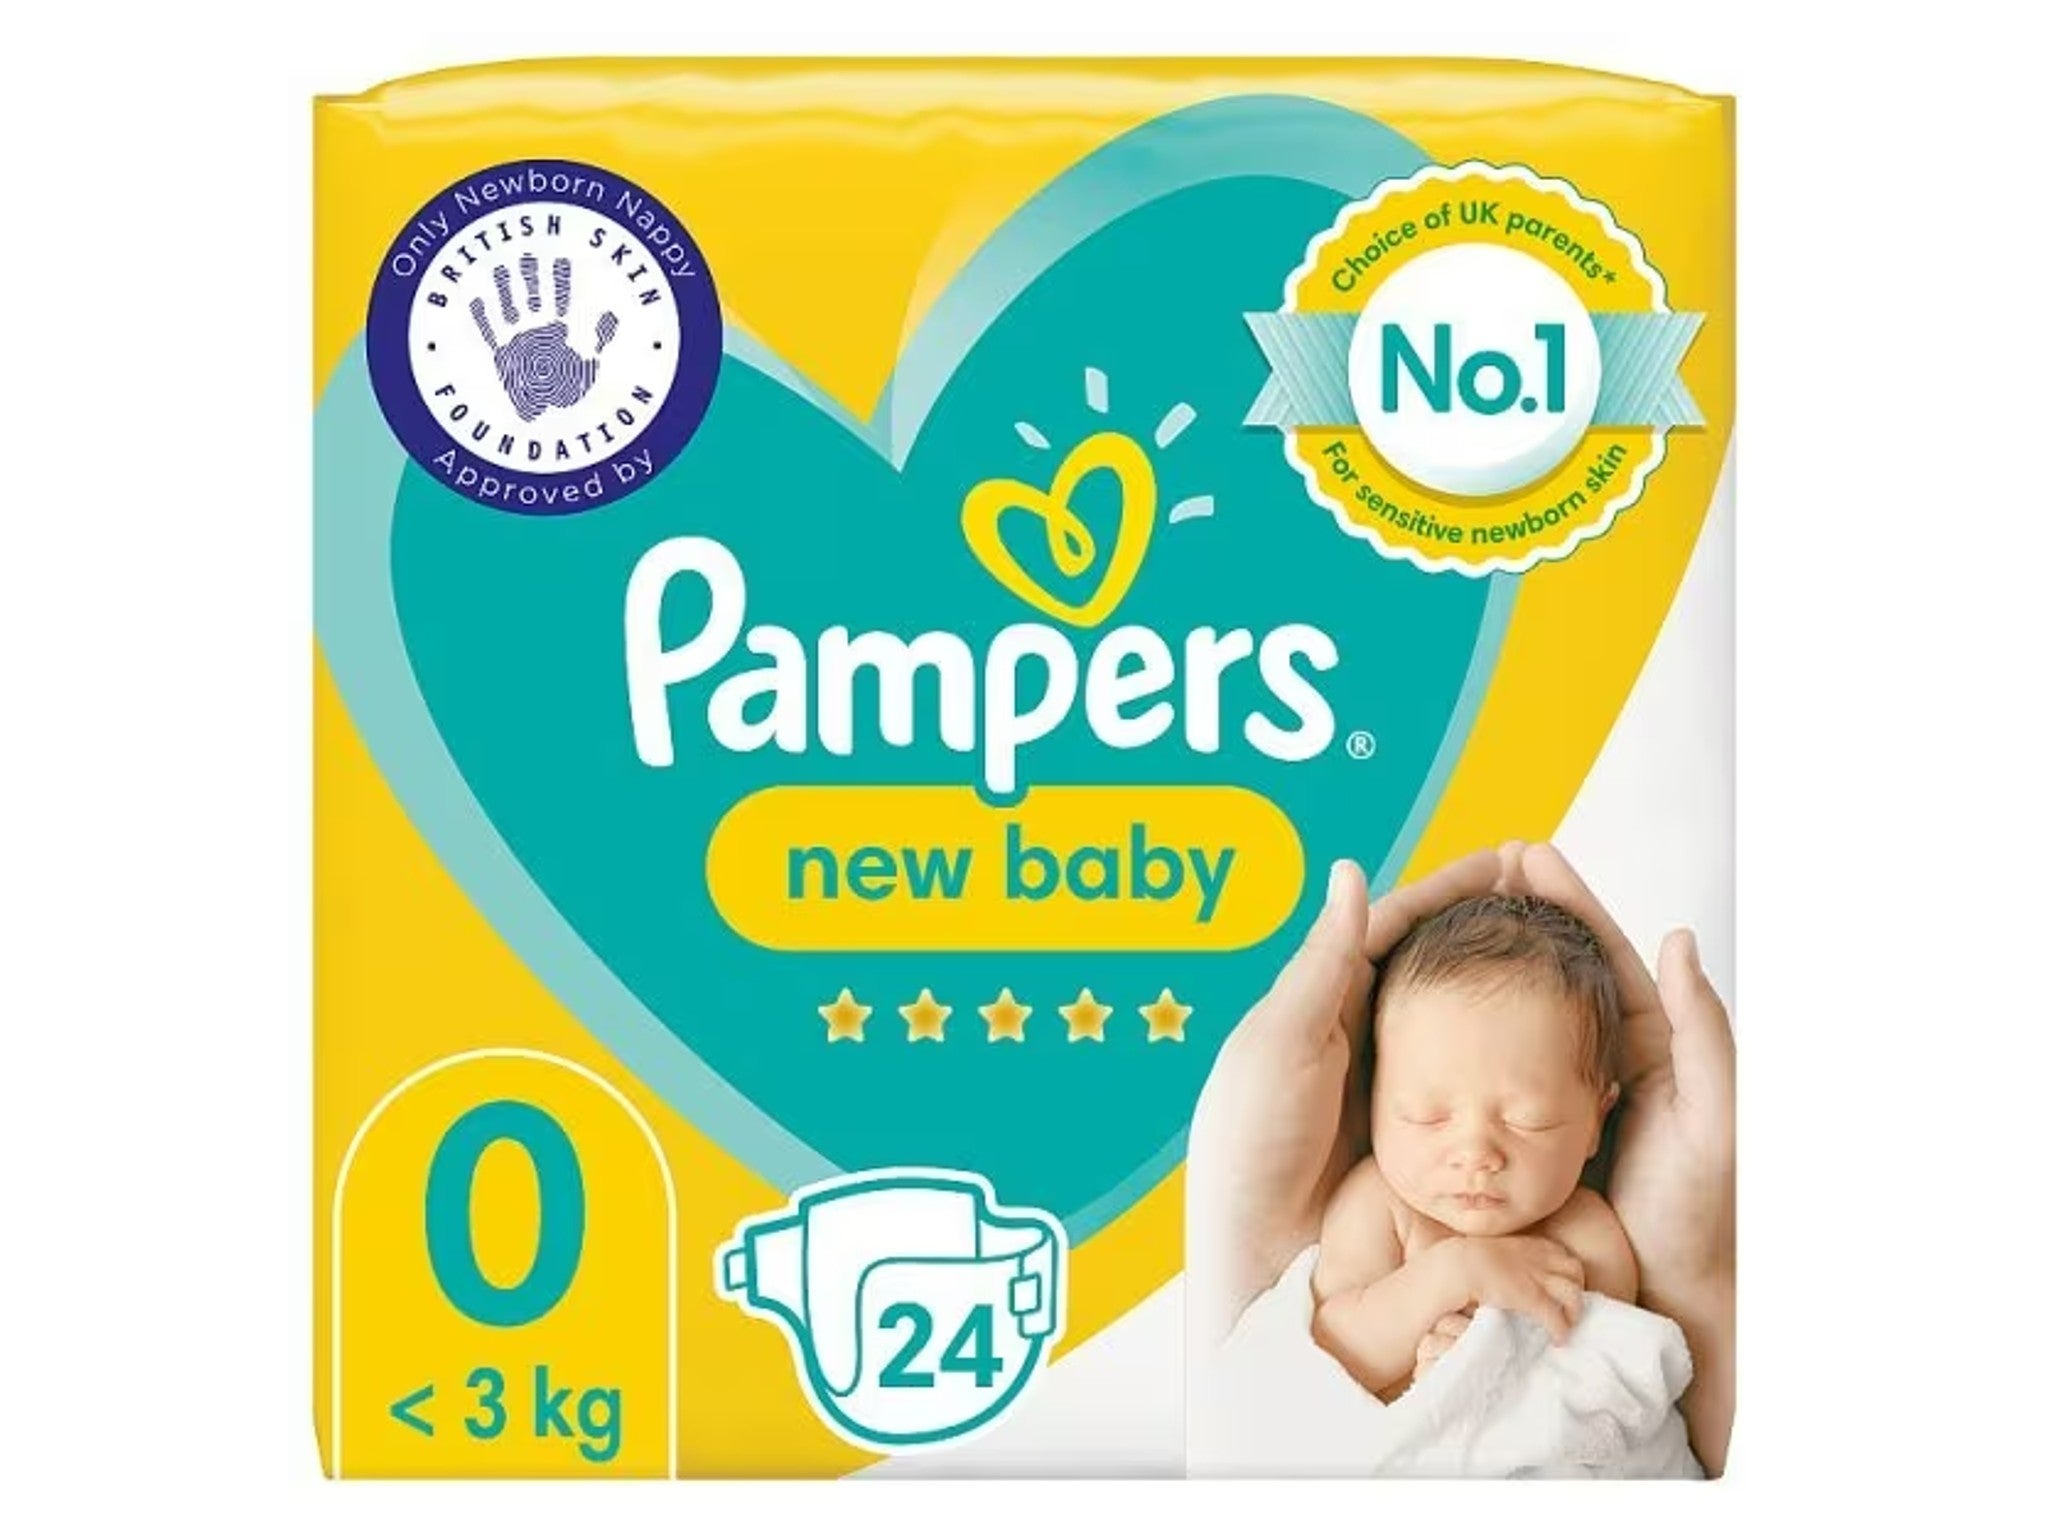 Pampers new baby nappies